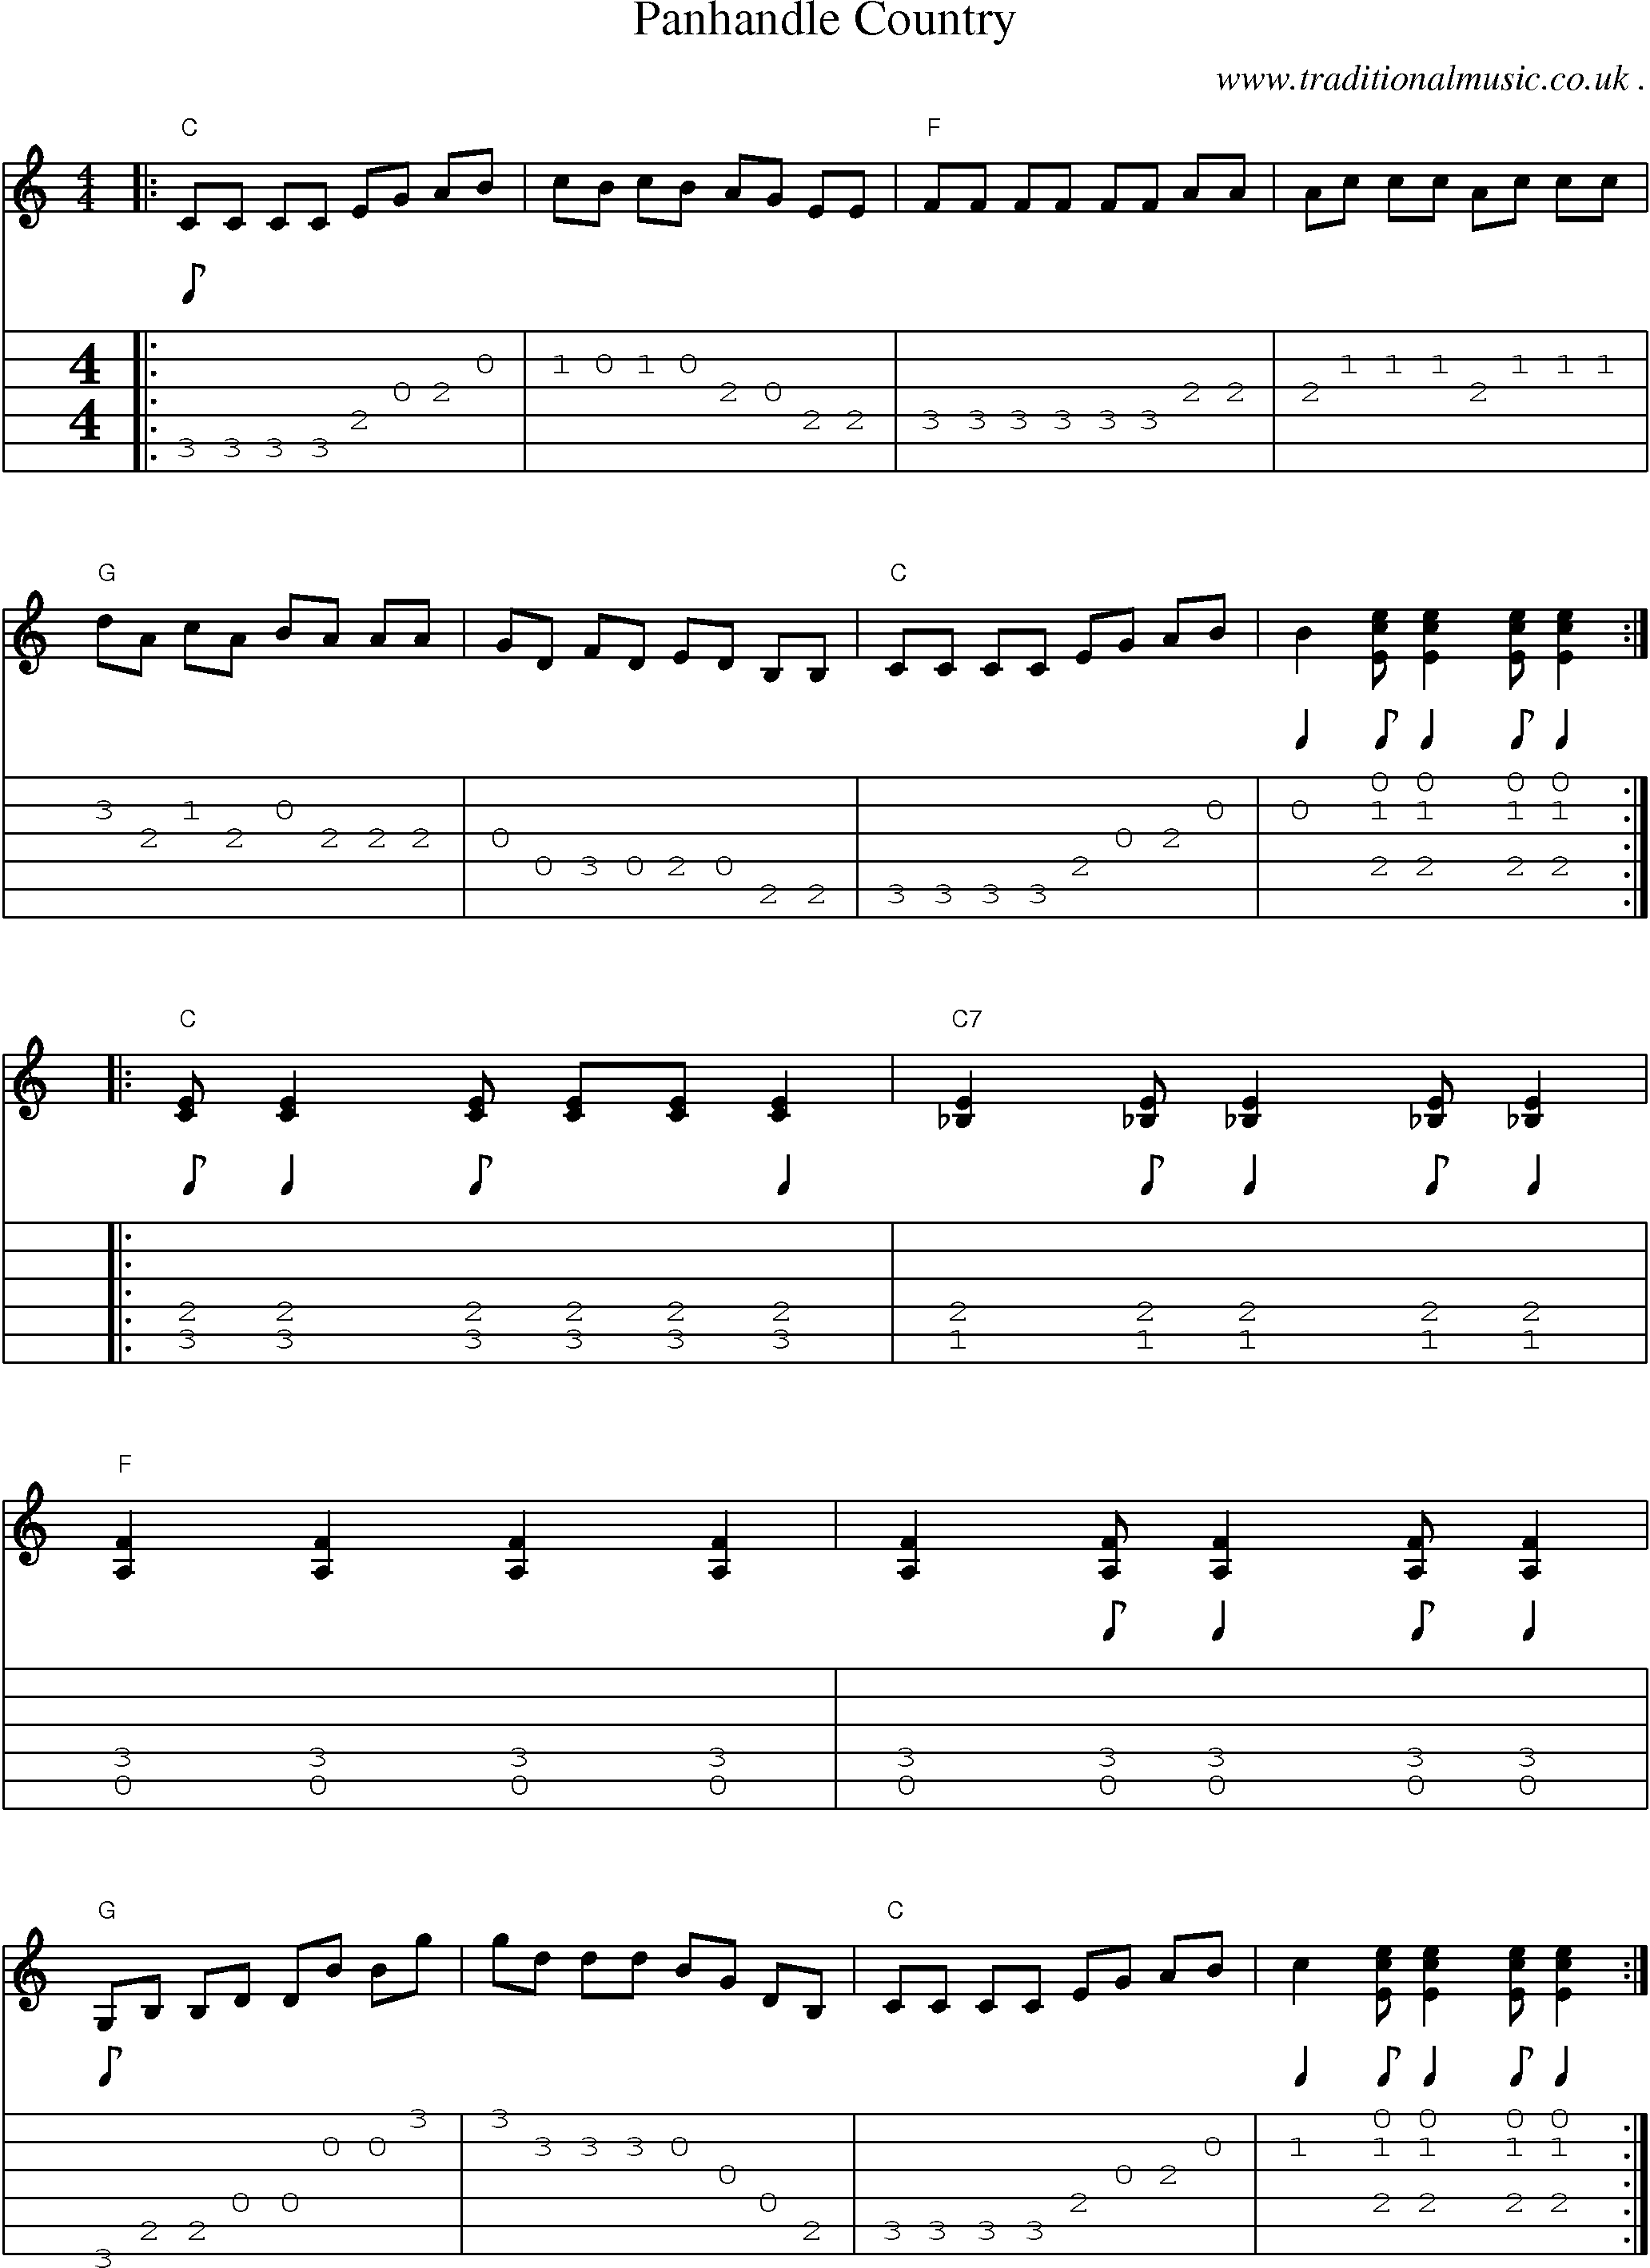 Music Score and Guitar Tabs for Panhandle Country